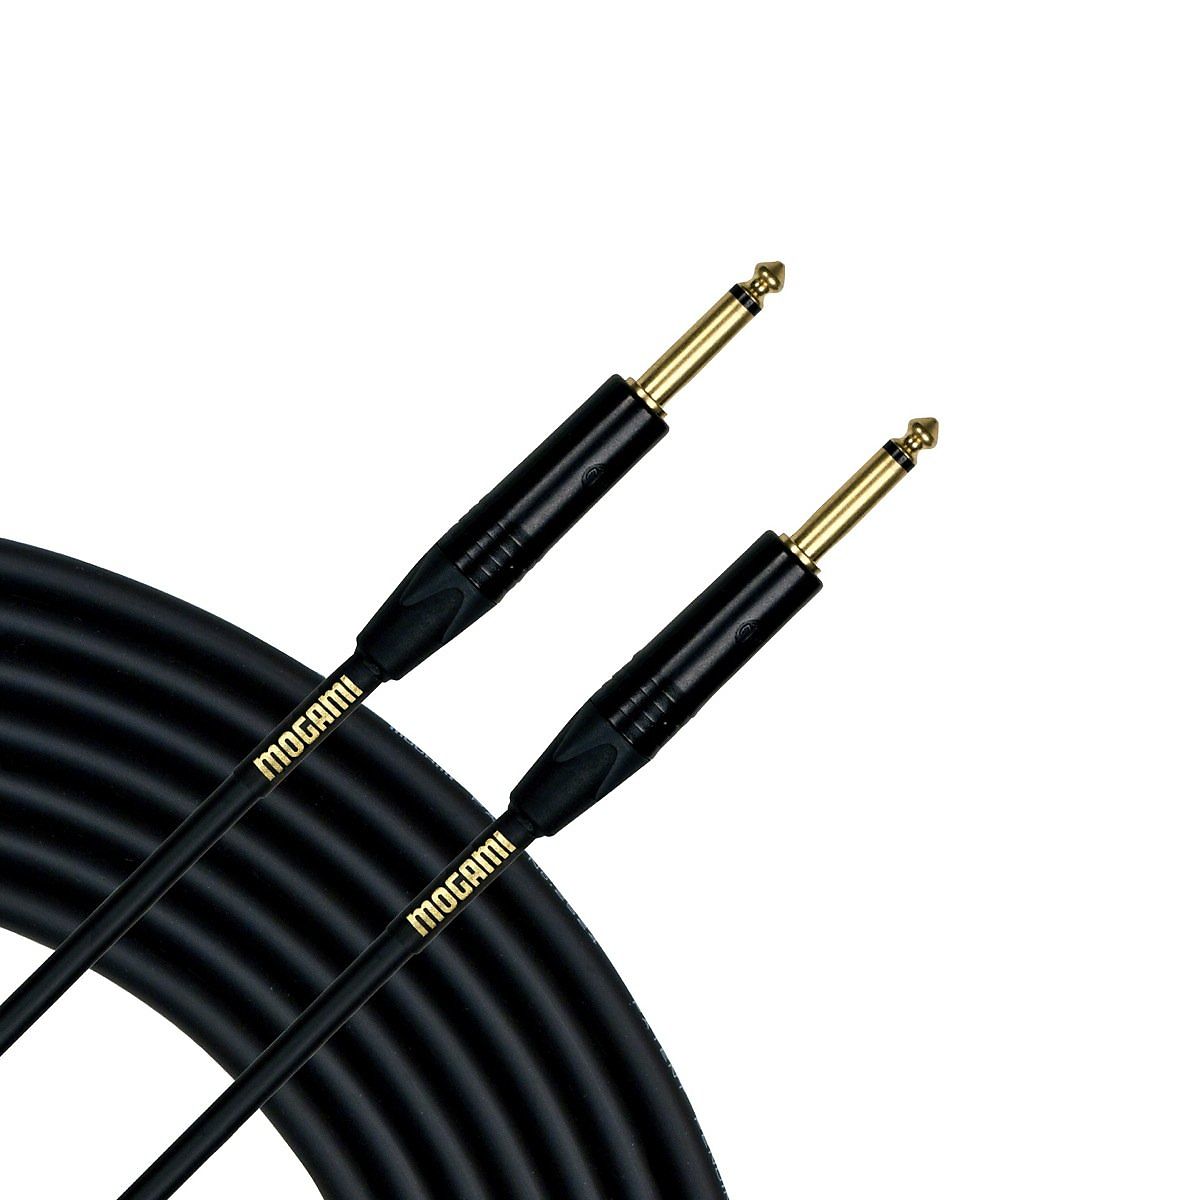 Mogami Gold Guitar/Instrument Cable, 3 Foot